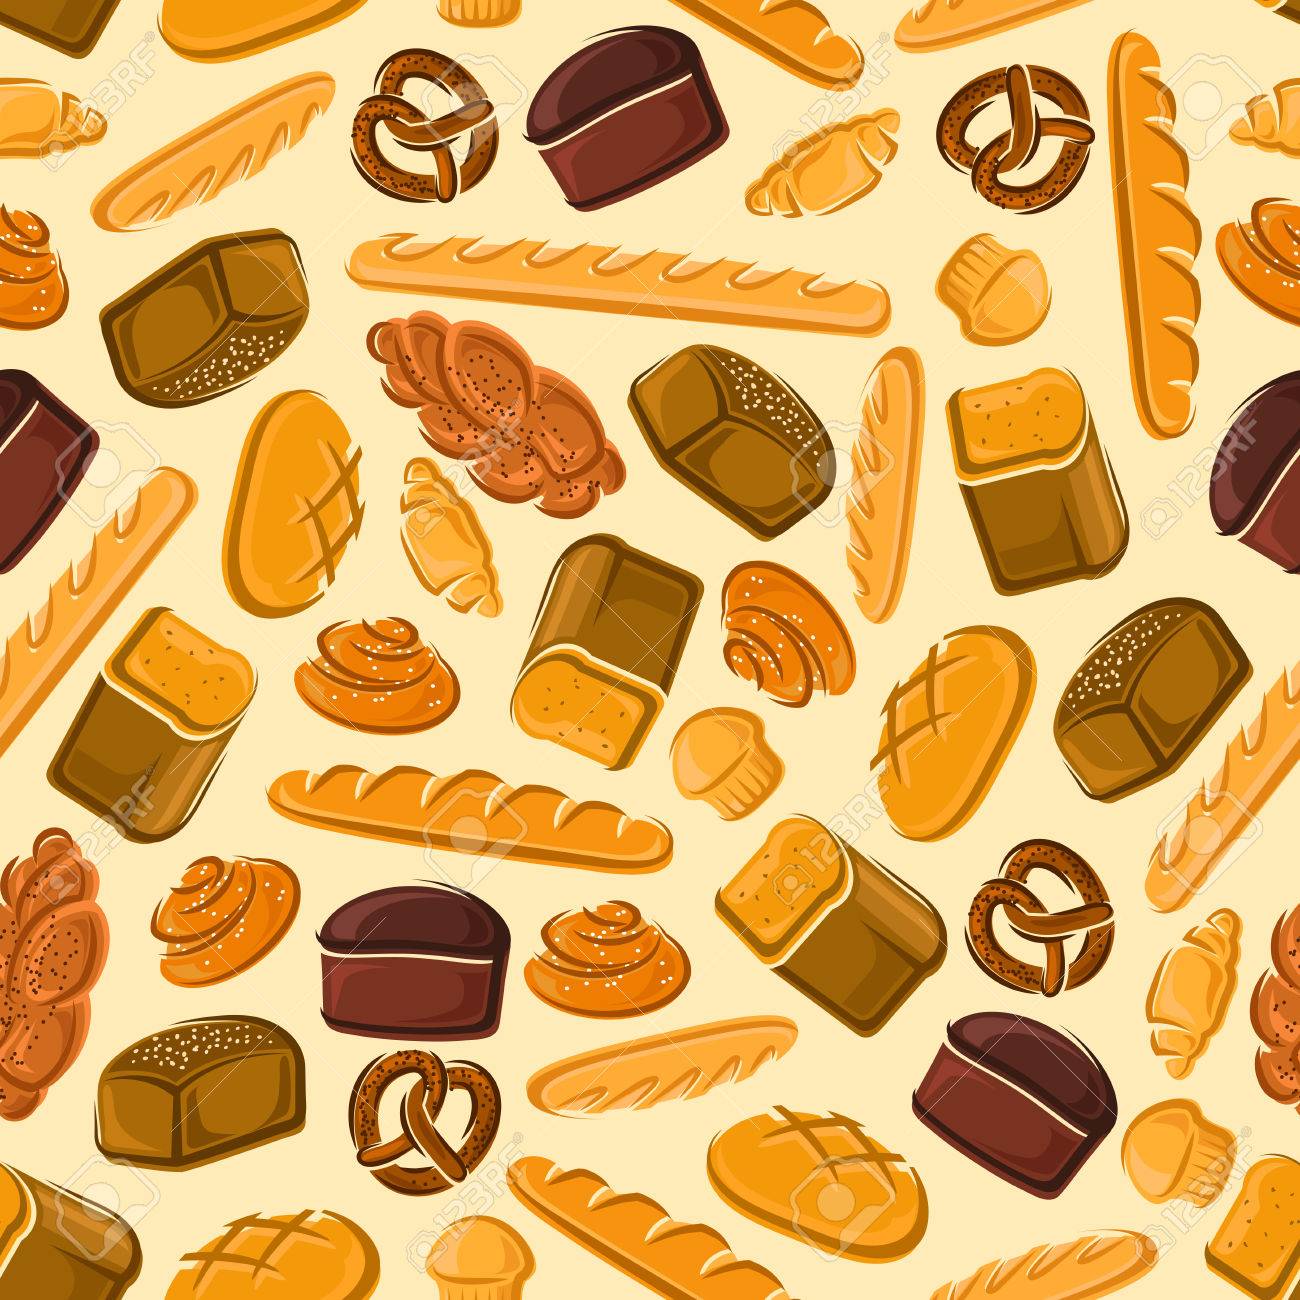 Bread And Bakery Products Seamless Pattern Background With Vector